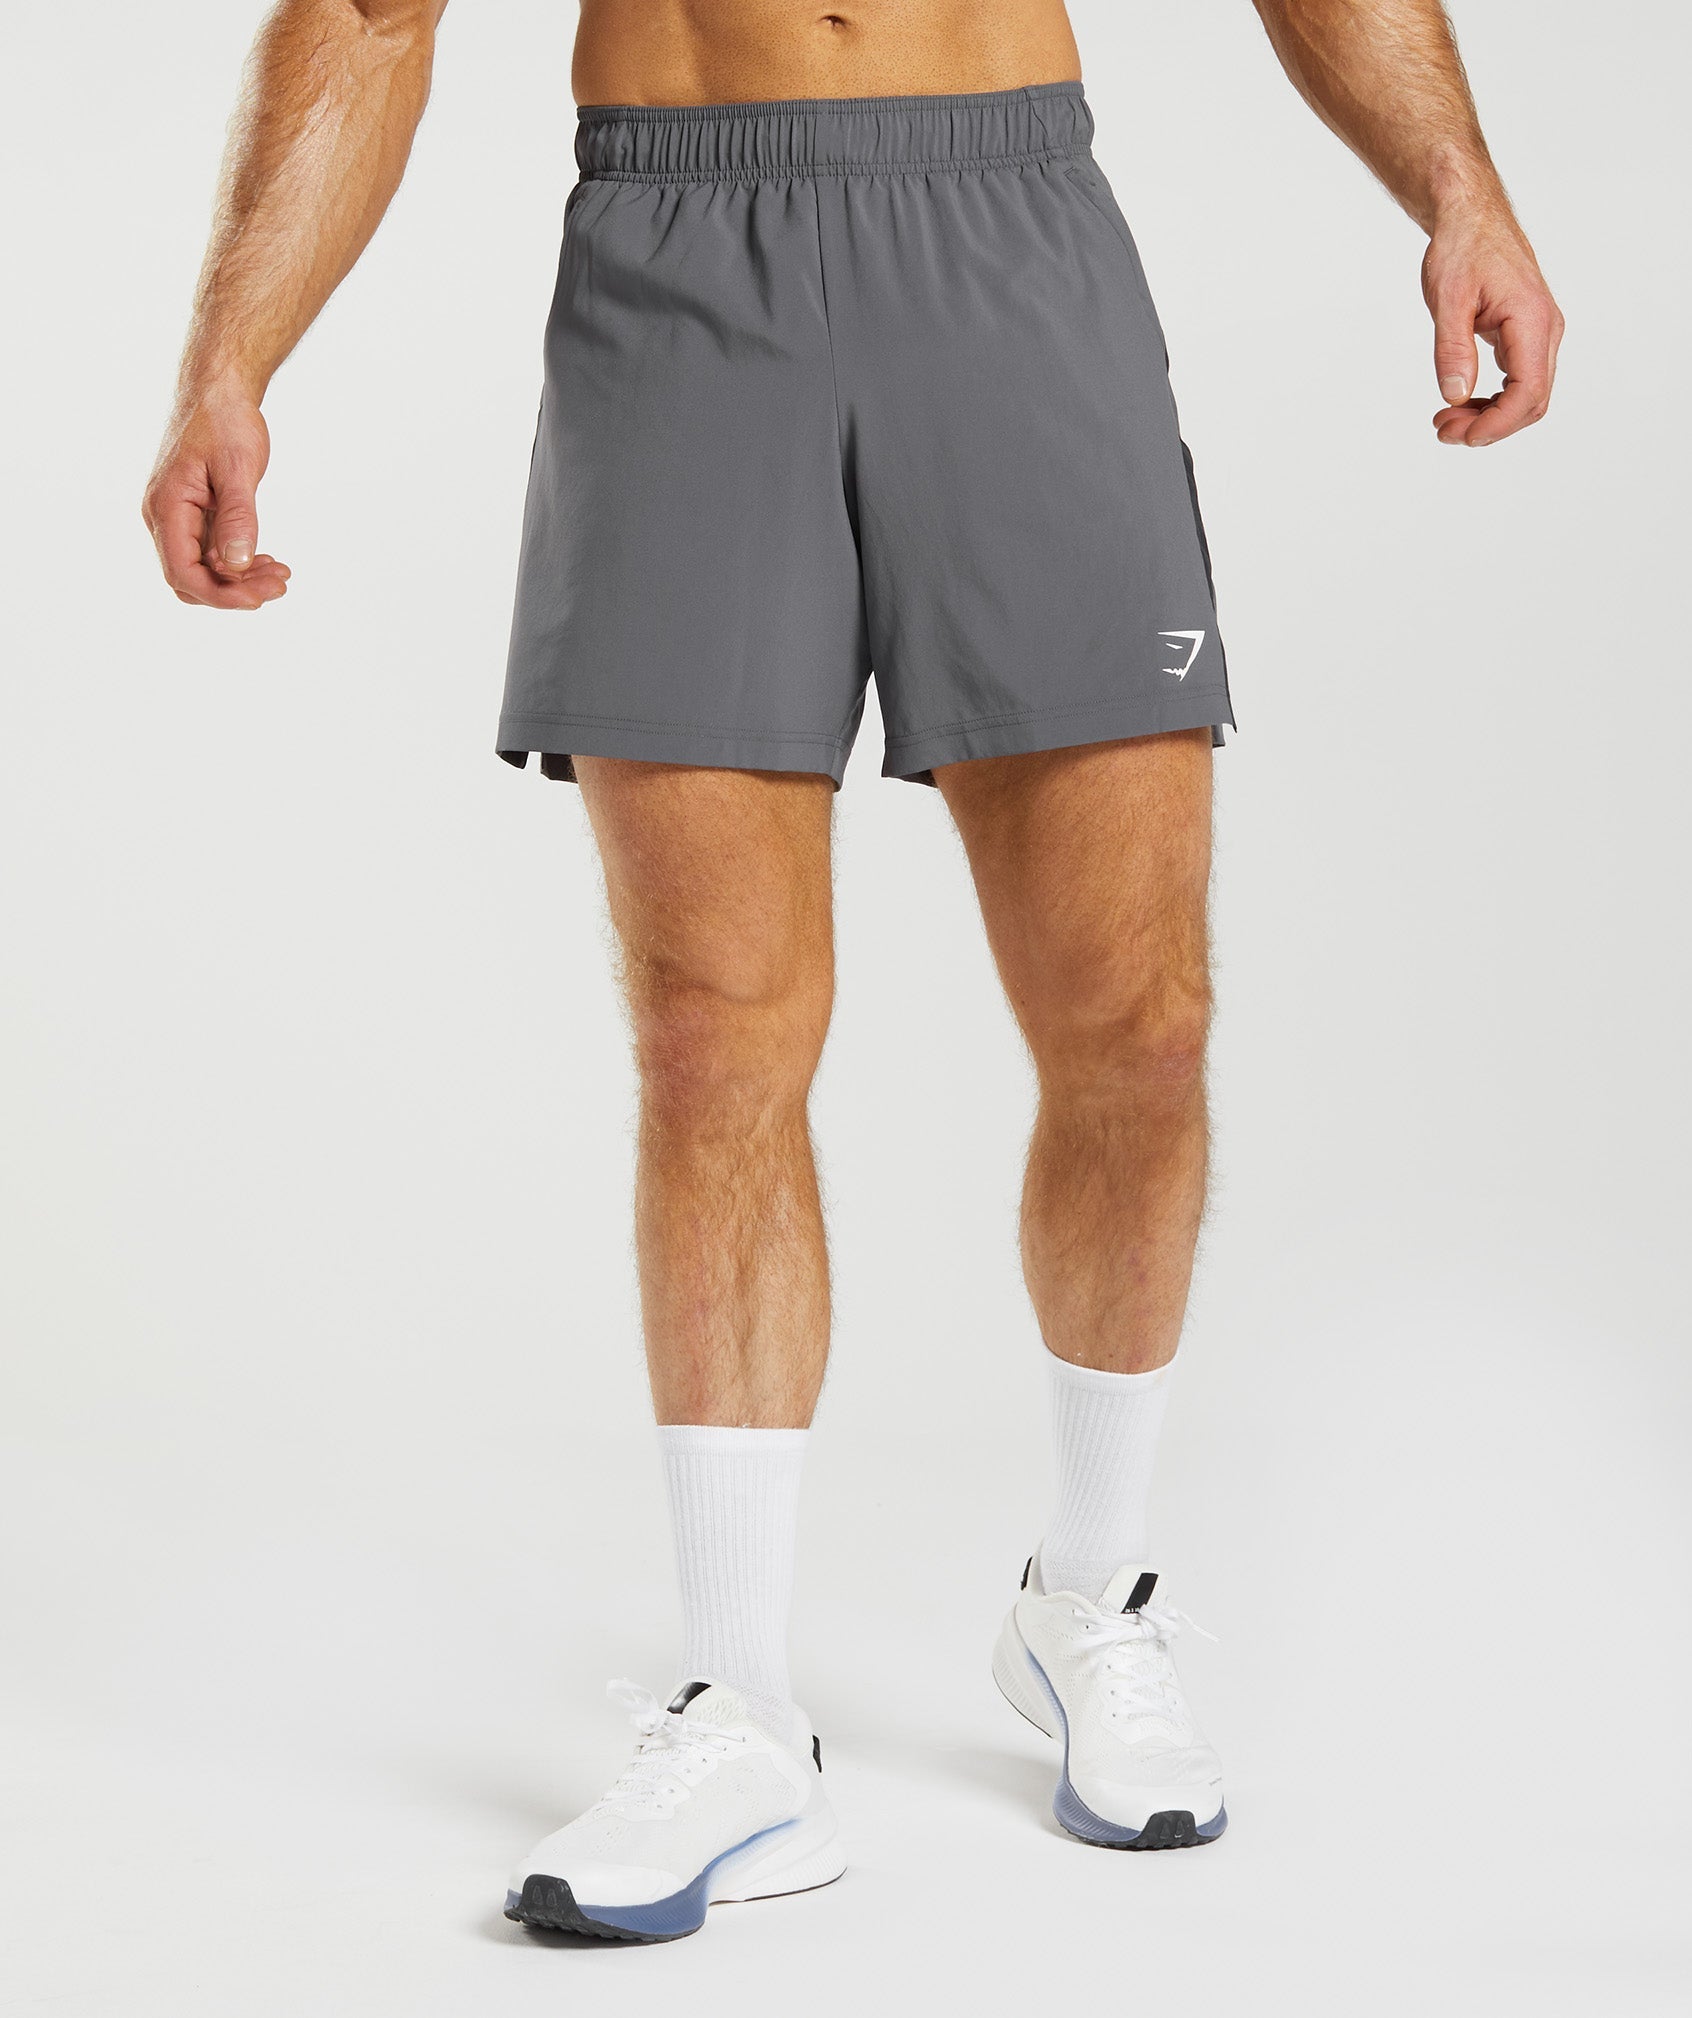 Gymshark Arrival 7 Shorts - Silhouette Grey